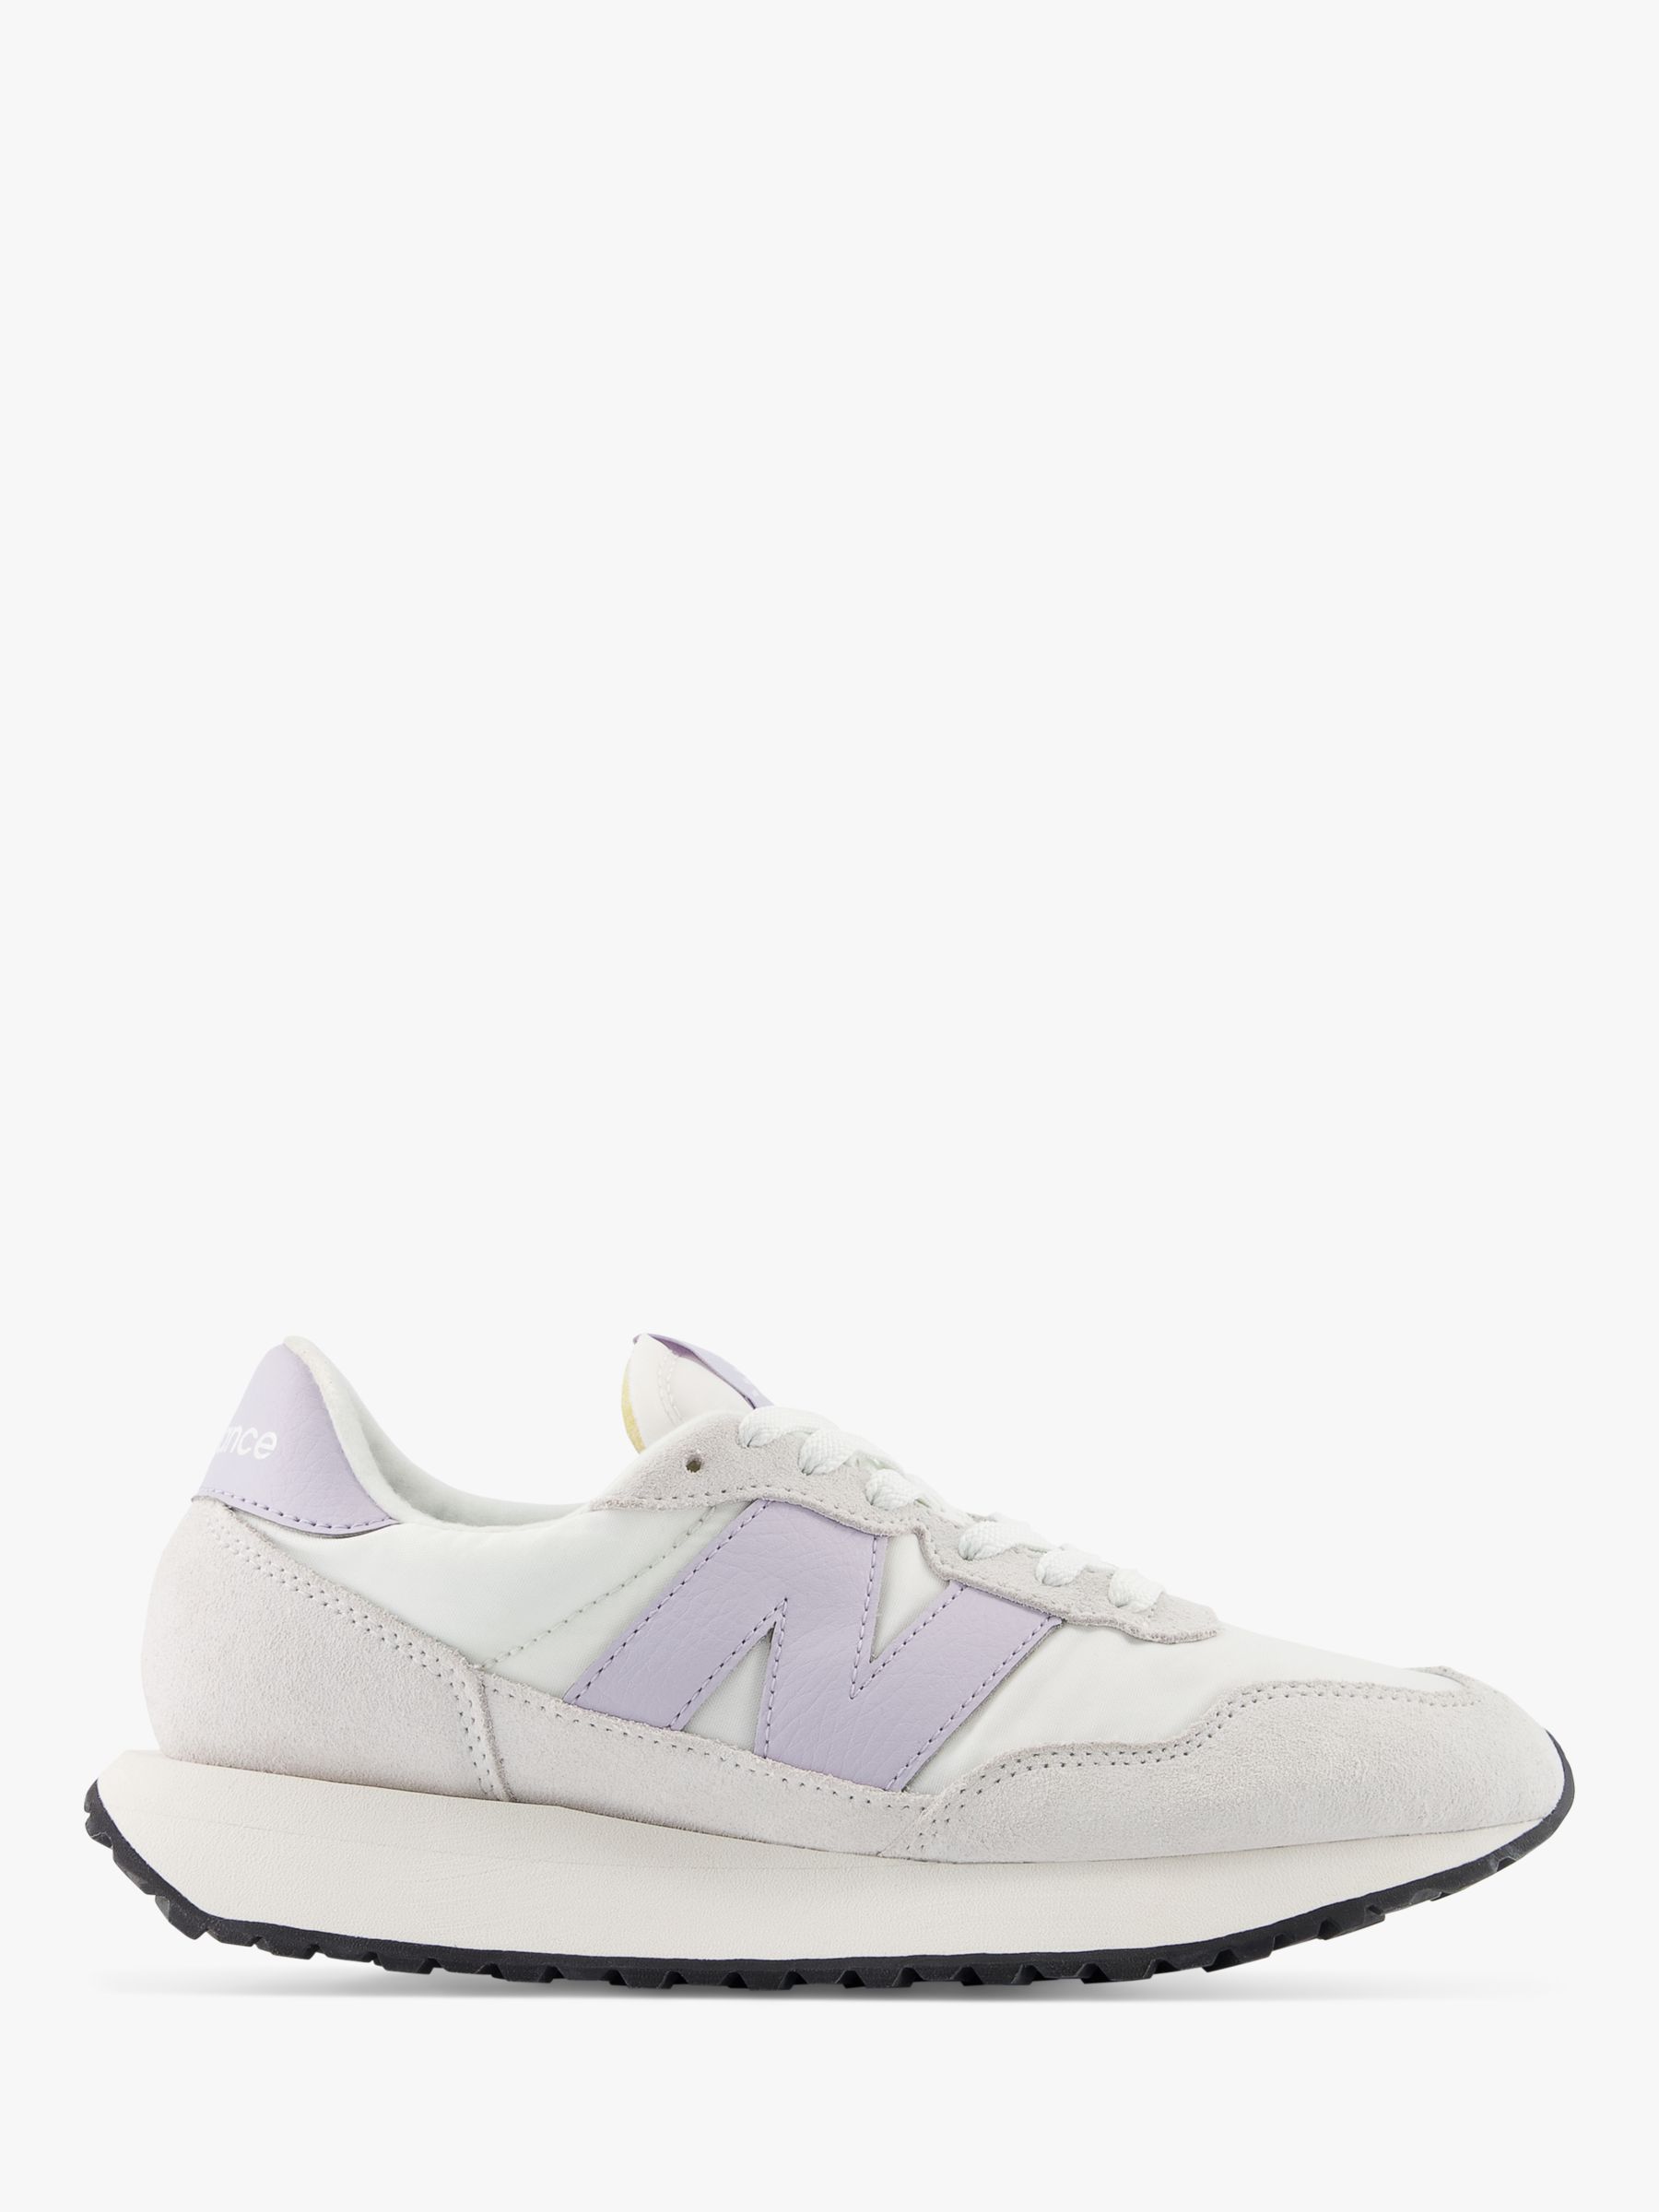 New Balance 237 Suede Mesh Trainers